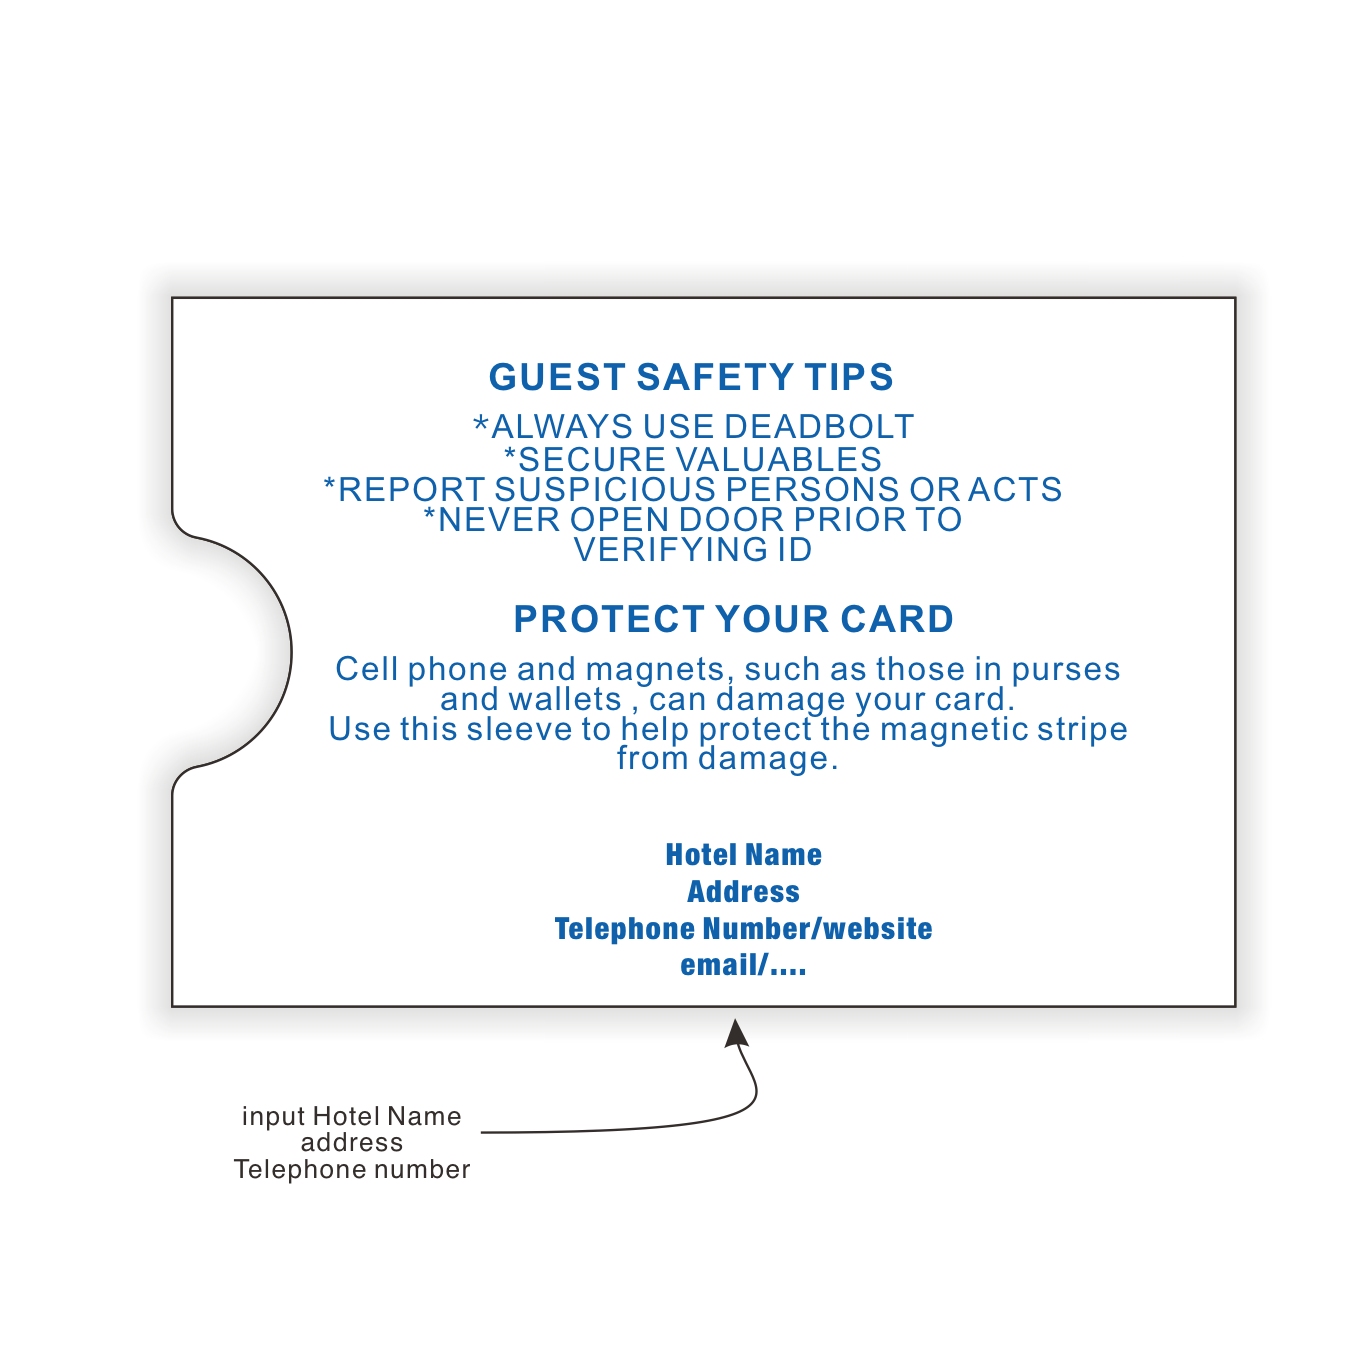 Customizable Cashier Depot hotel Keycard Envelope/Sleeve" Welcome Enjoy your stay!" 2-3/8" x 3-1/2"